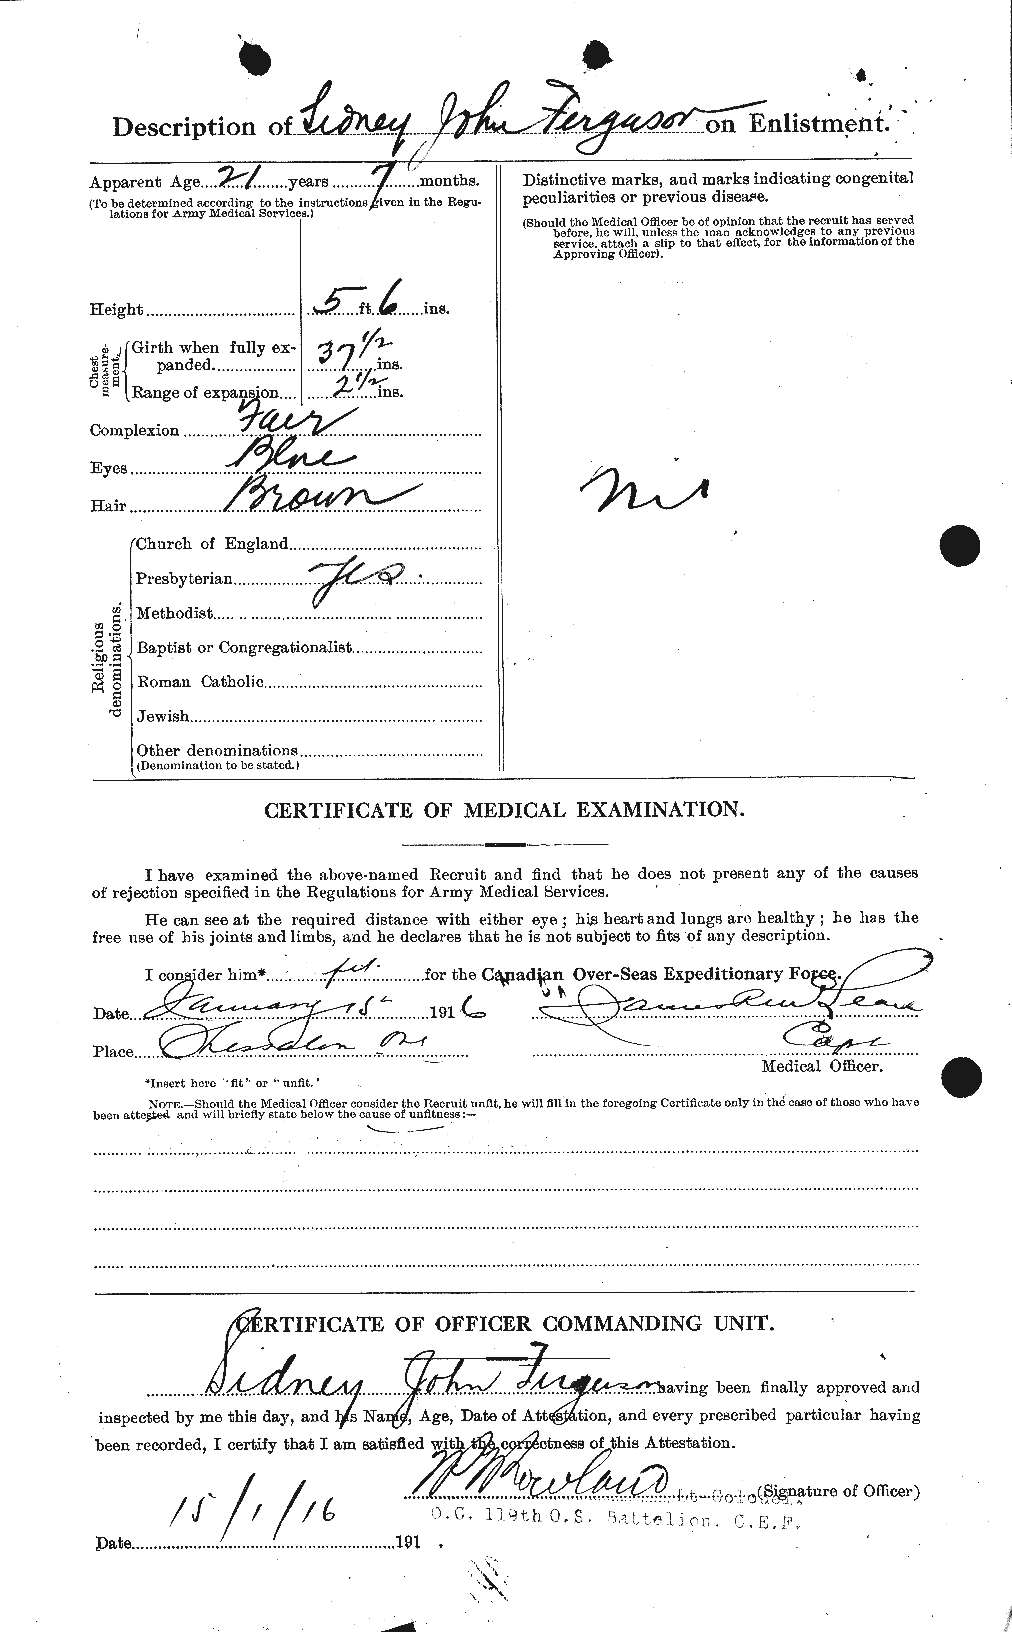 Personnel Records of the First World War - CEF 321664b